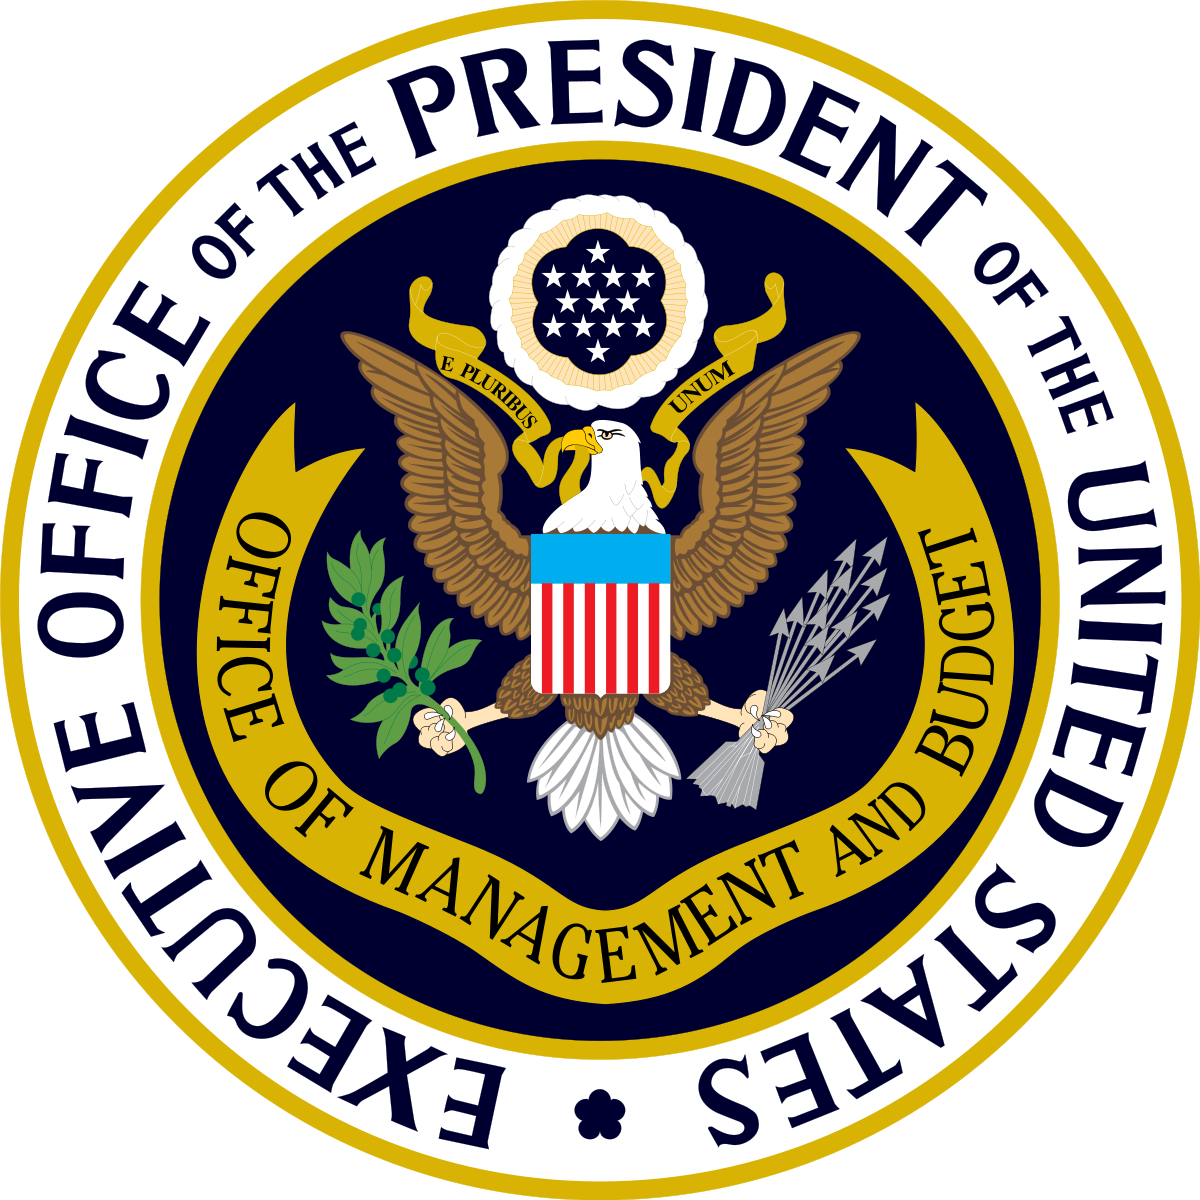 United States Office of Management and Budget seal